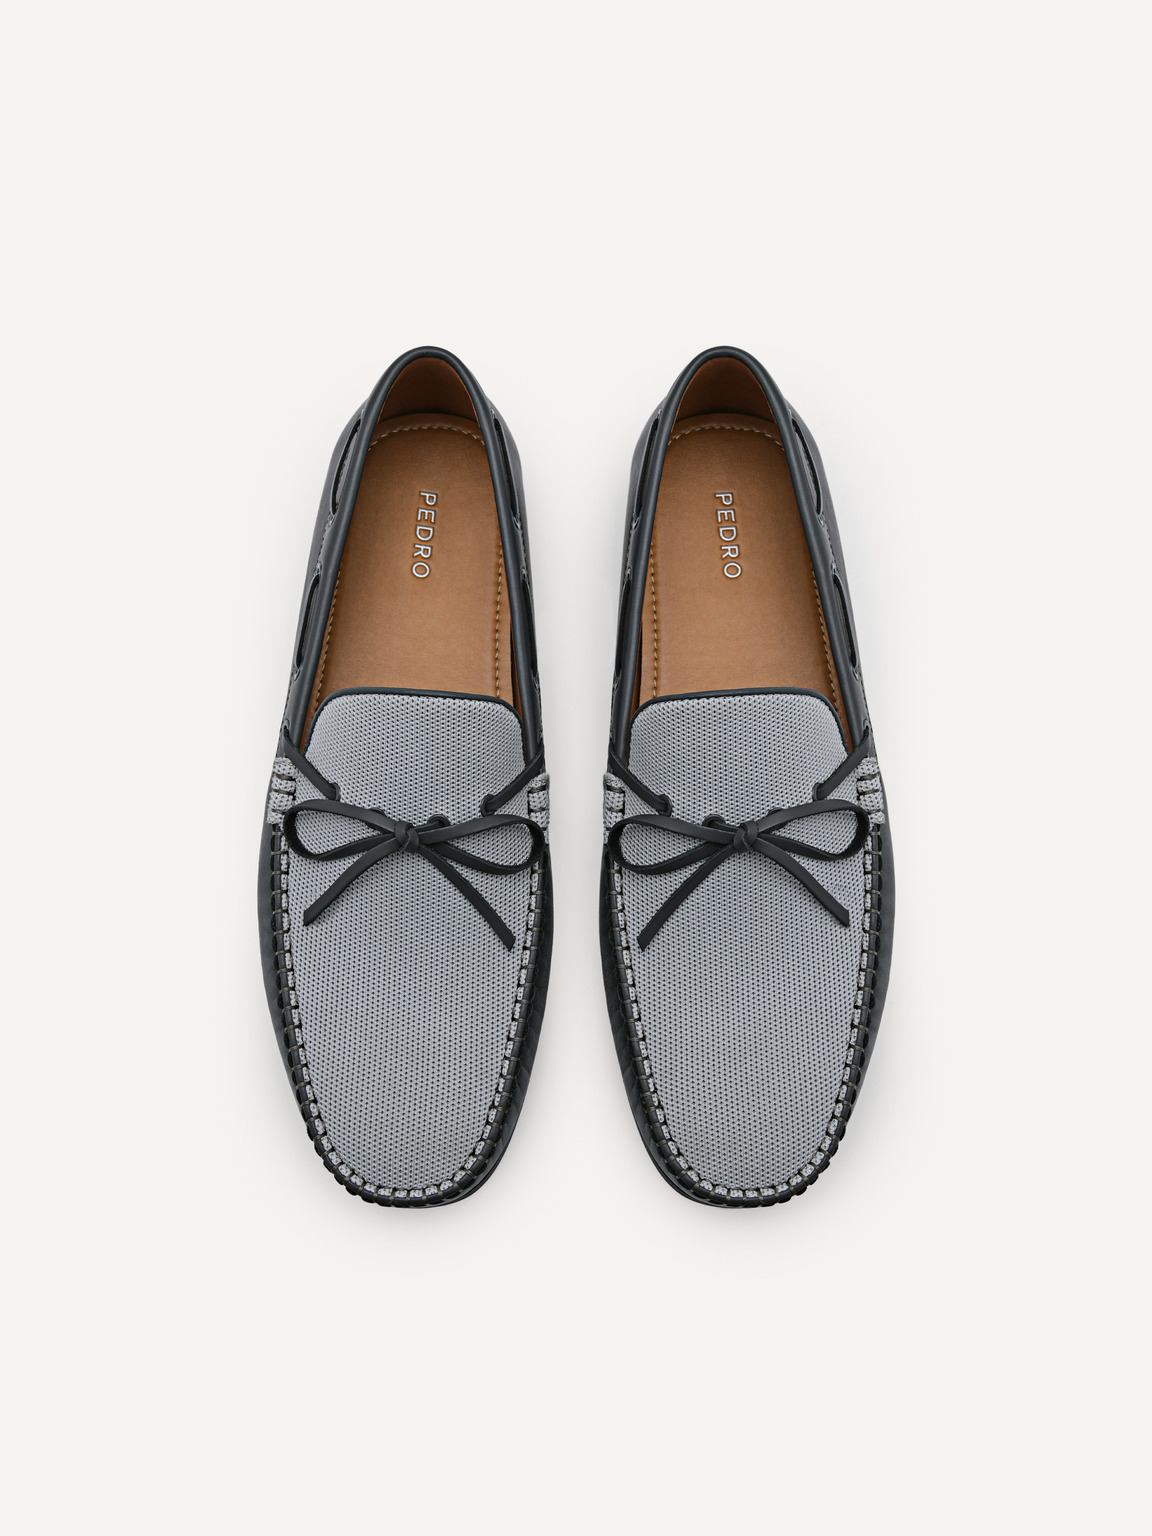 Leather Bow Driving Shoes, Dark Grey